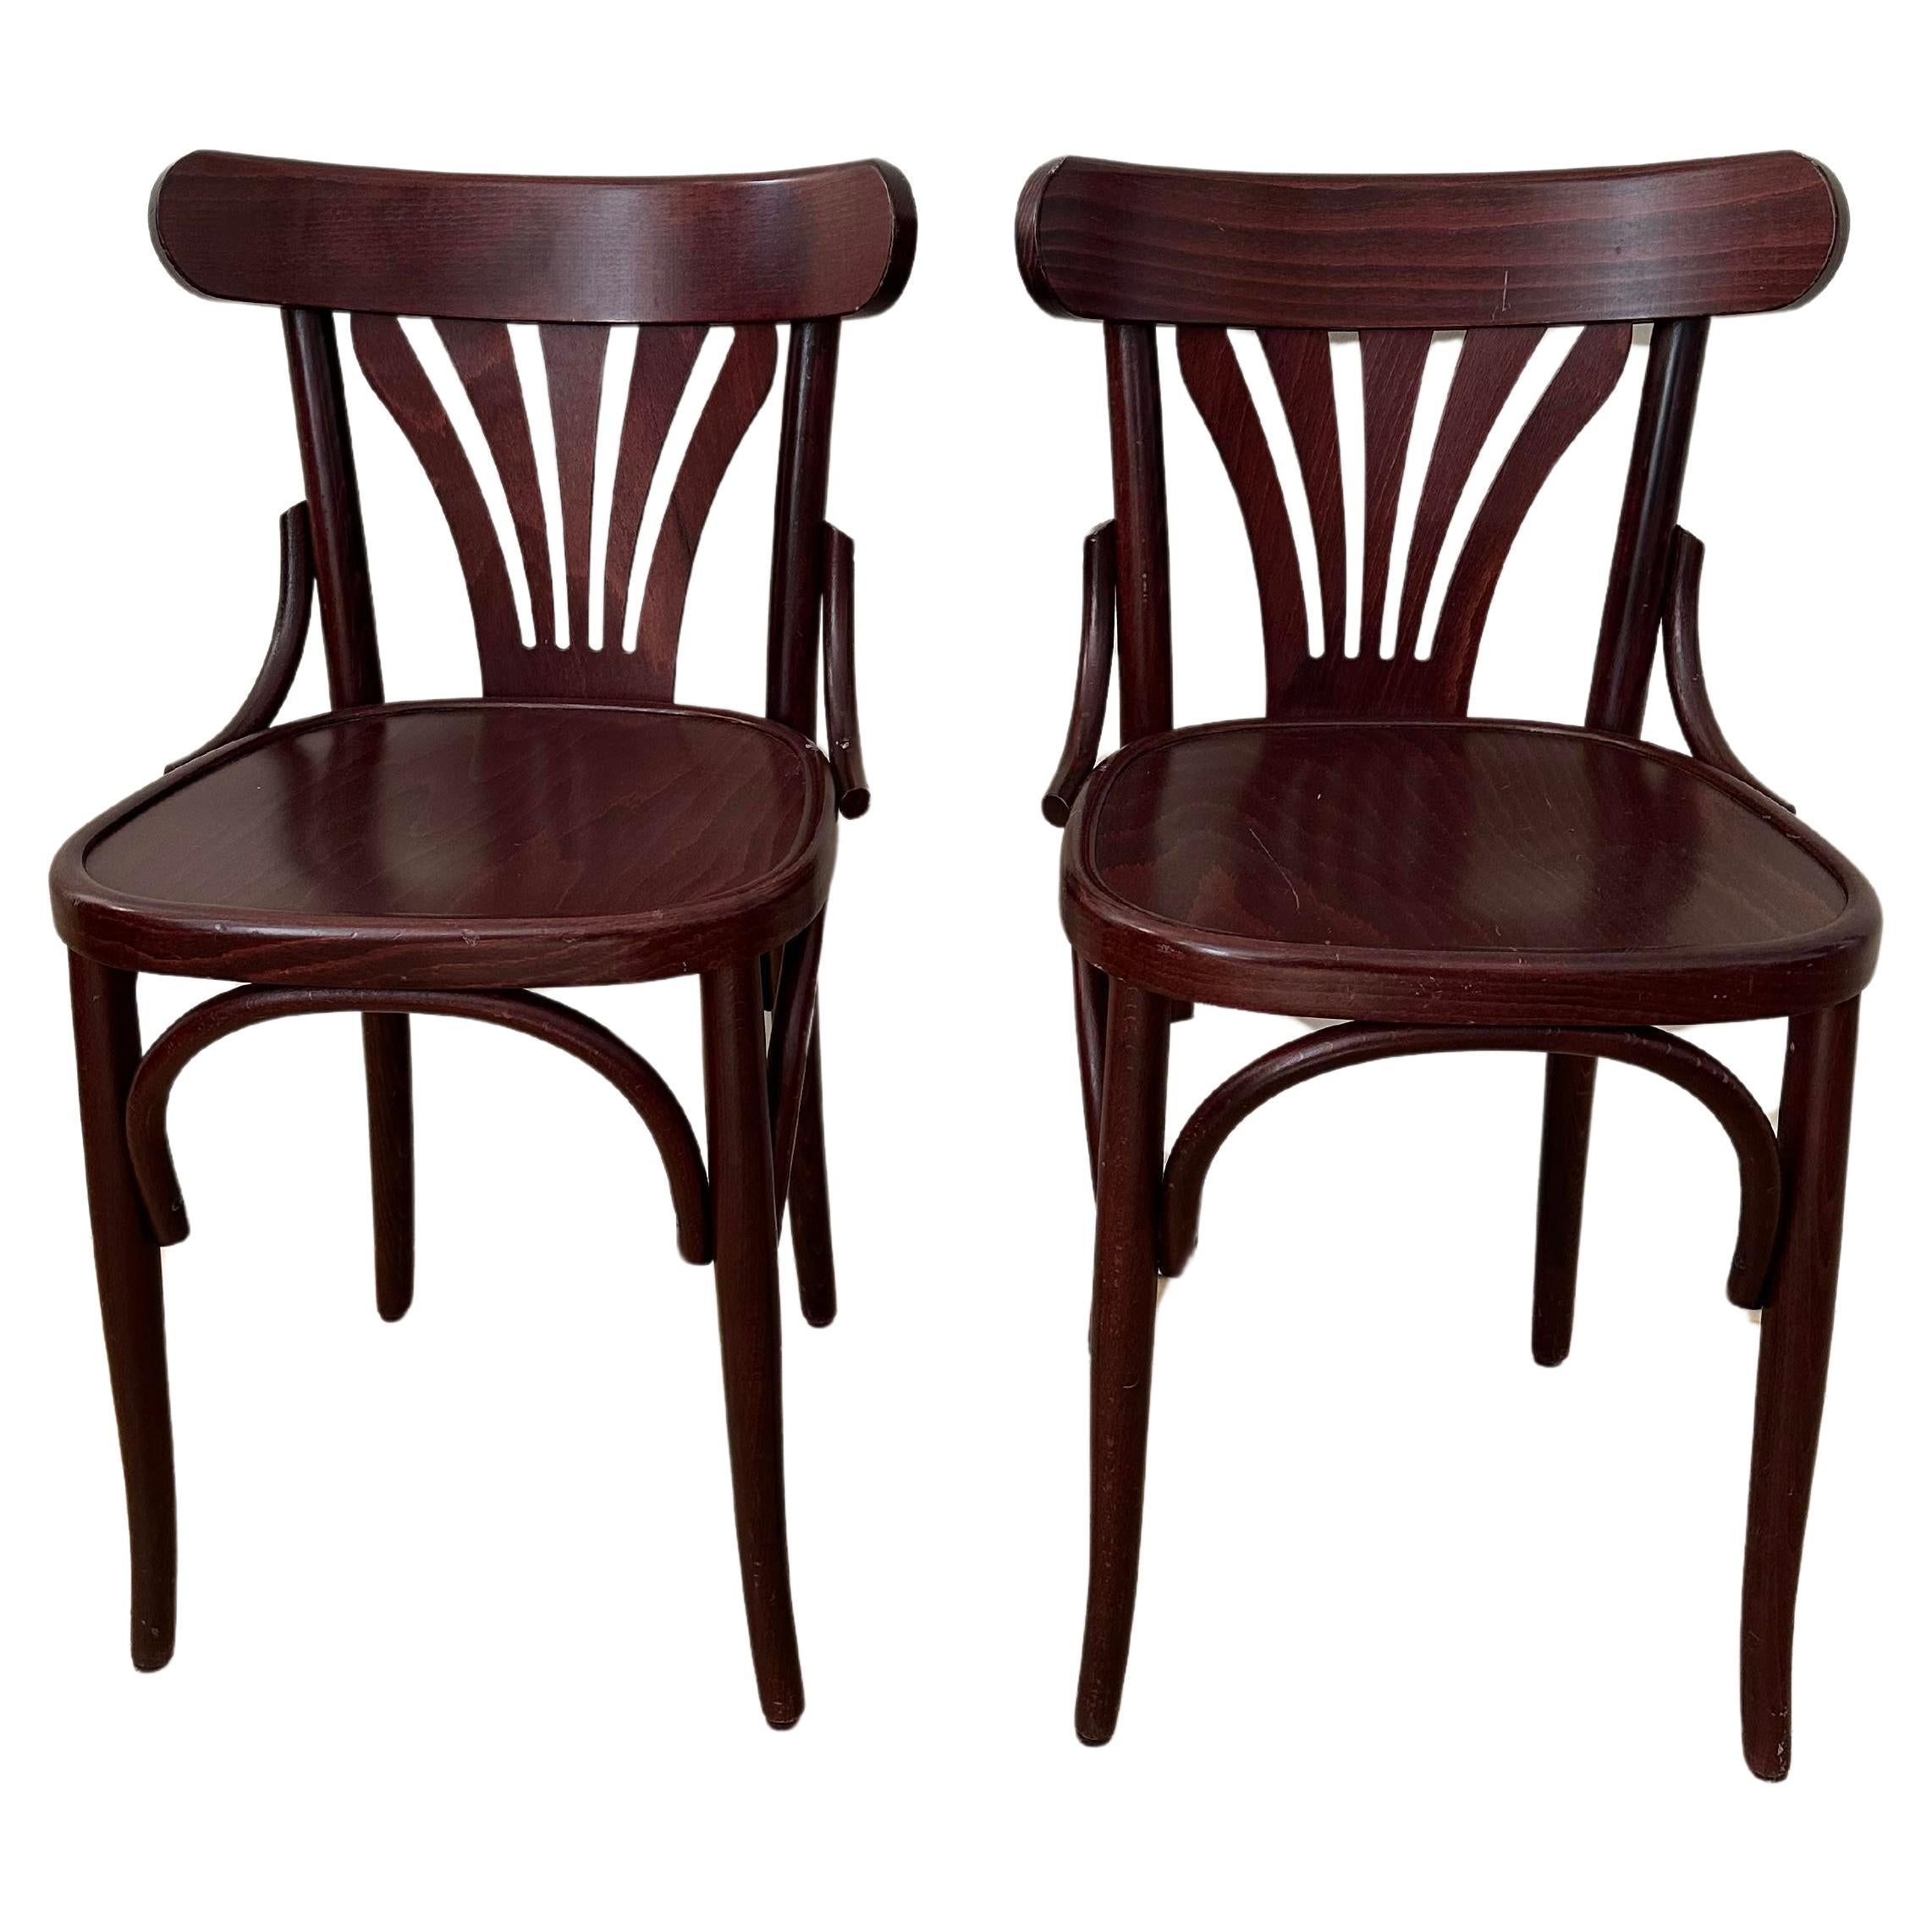 6 bistro chairs from Paris For Sale